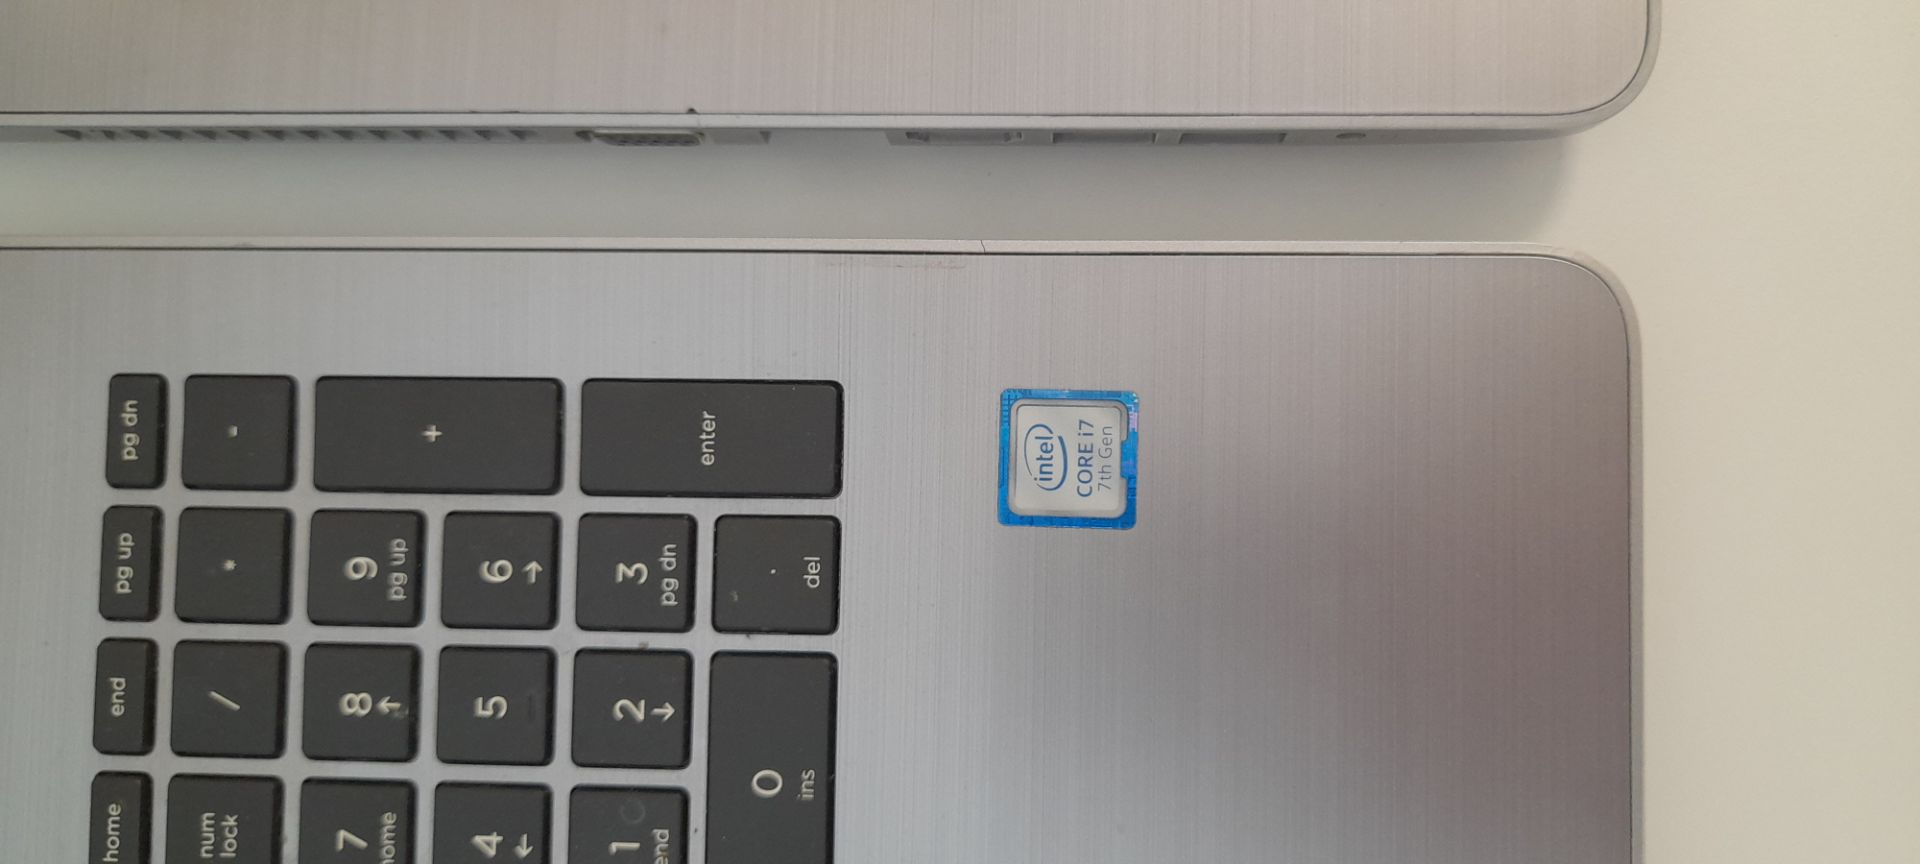 2x HP 3168NGW laptop with intel core i7, 7th Gen. Collection from Canary Wharf, London, E14 - Image 4 of 12